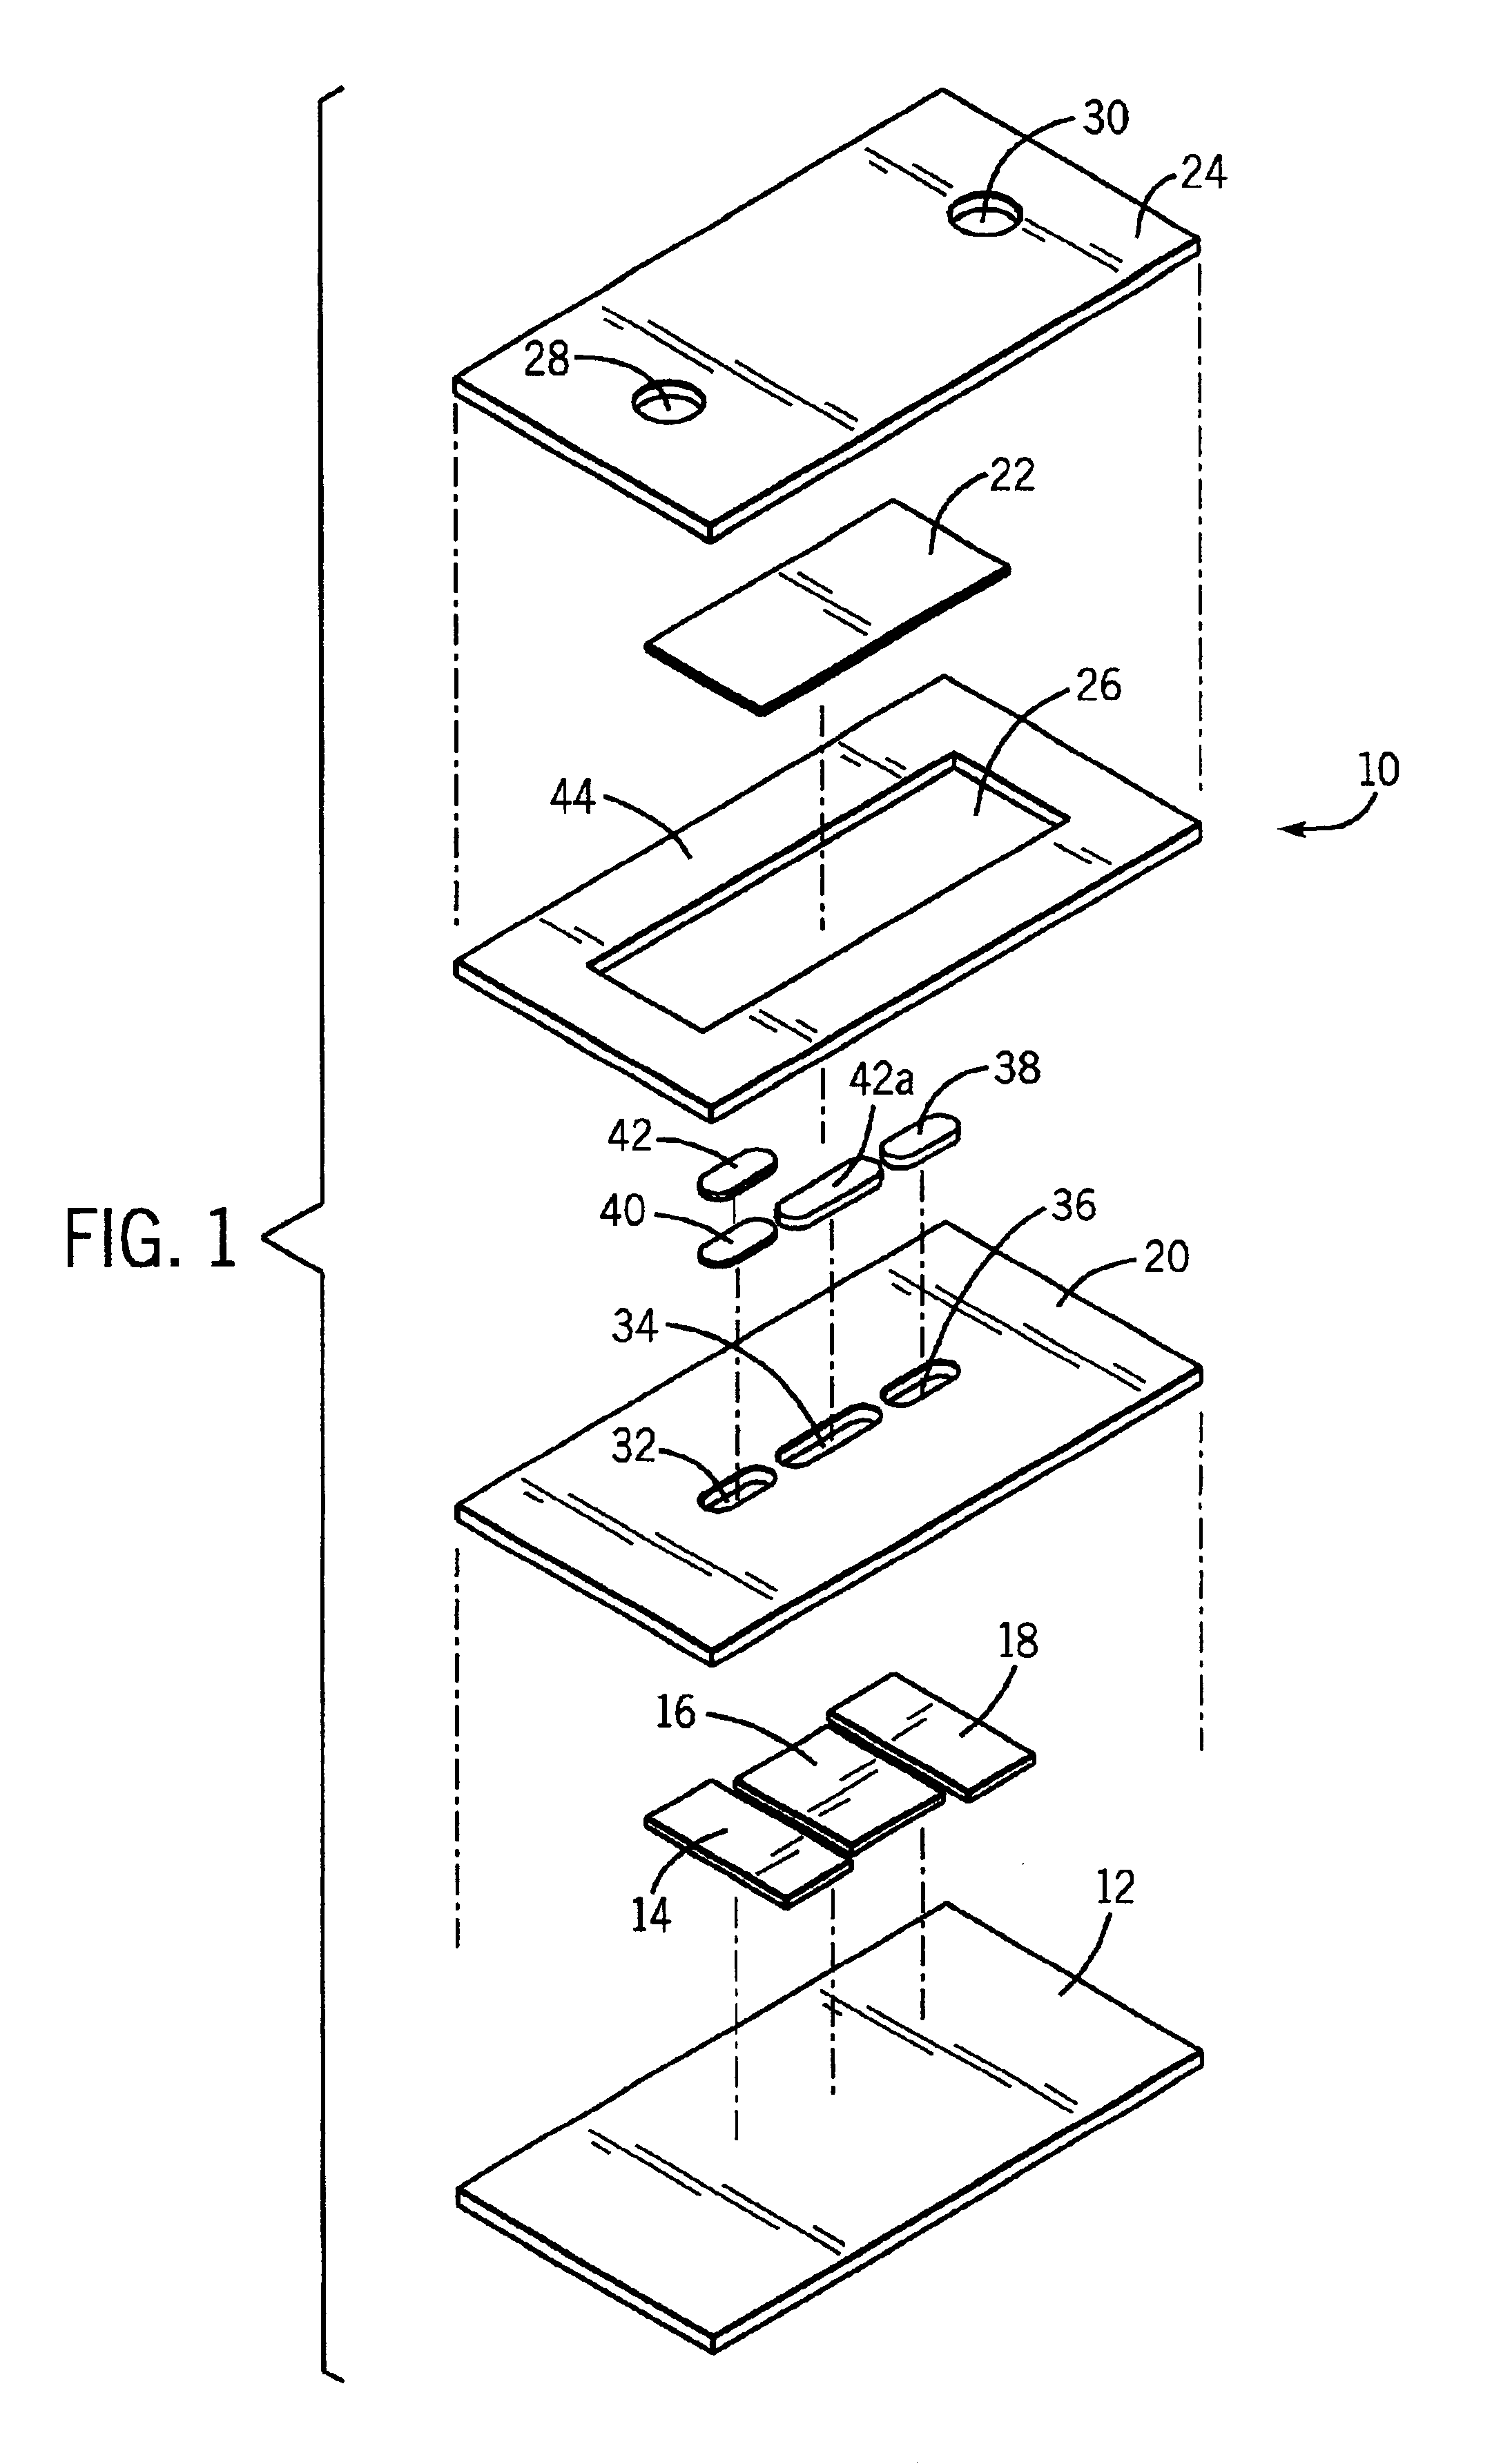 Sensor having electrode for determining the rate of flow of a fluid